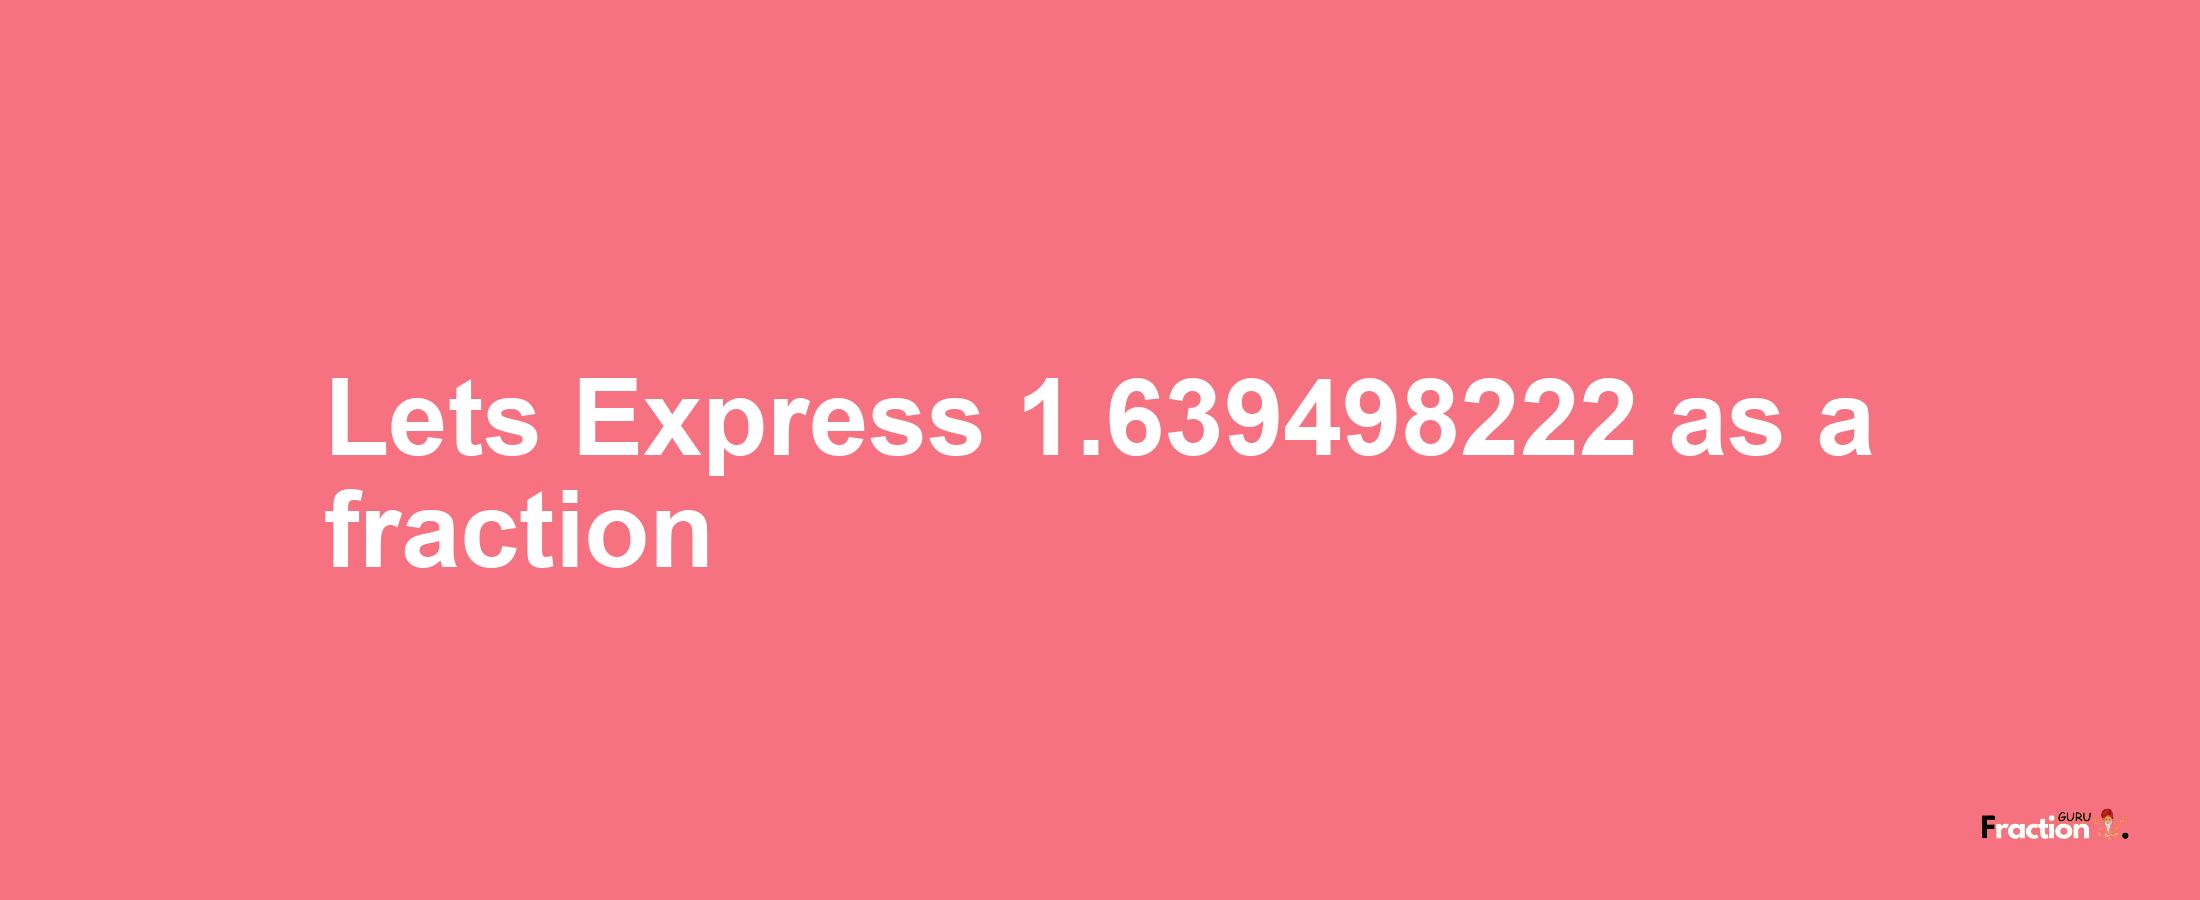 Lets Express 1.639498222 as afraction